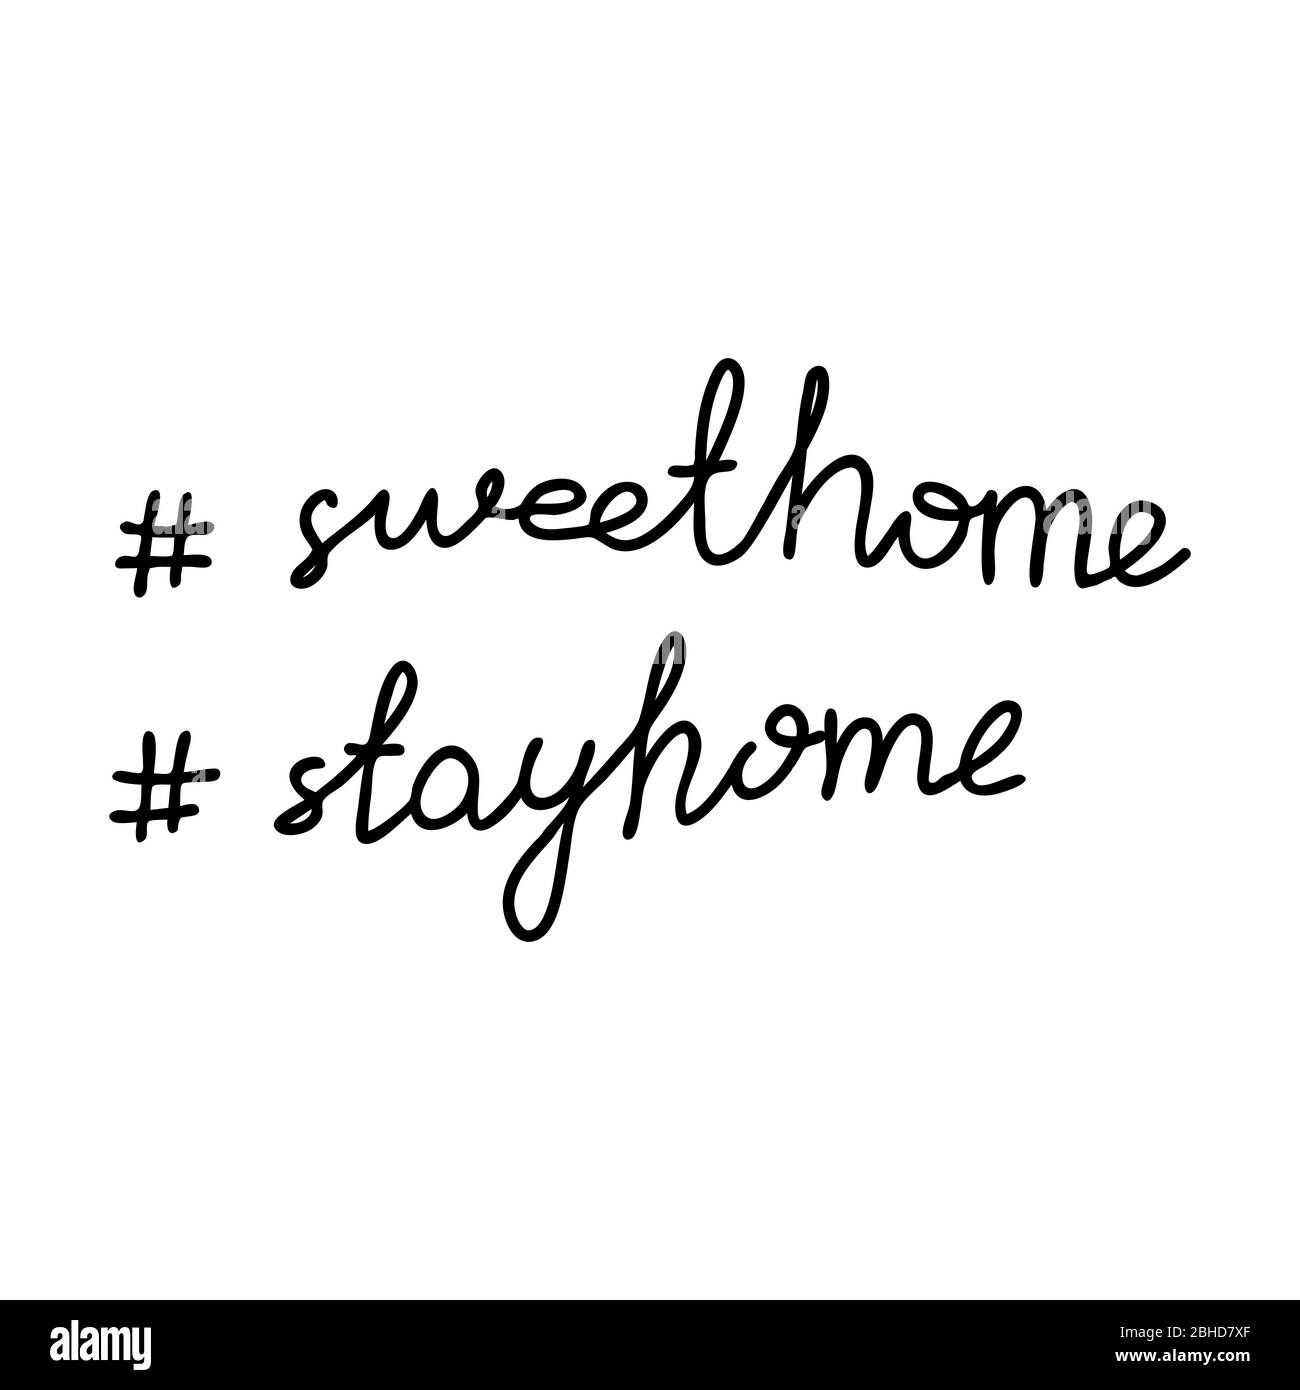 Sweet home, stay home. Handwritten hashtag phrases. Isolated on white background. Vector stock illustration. Stock Vector